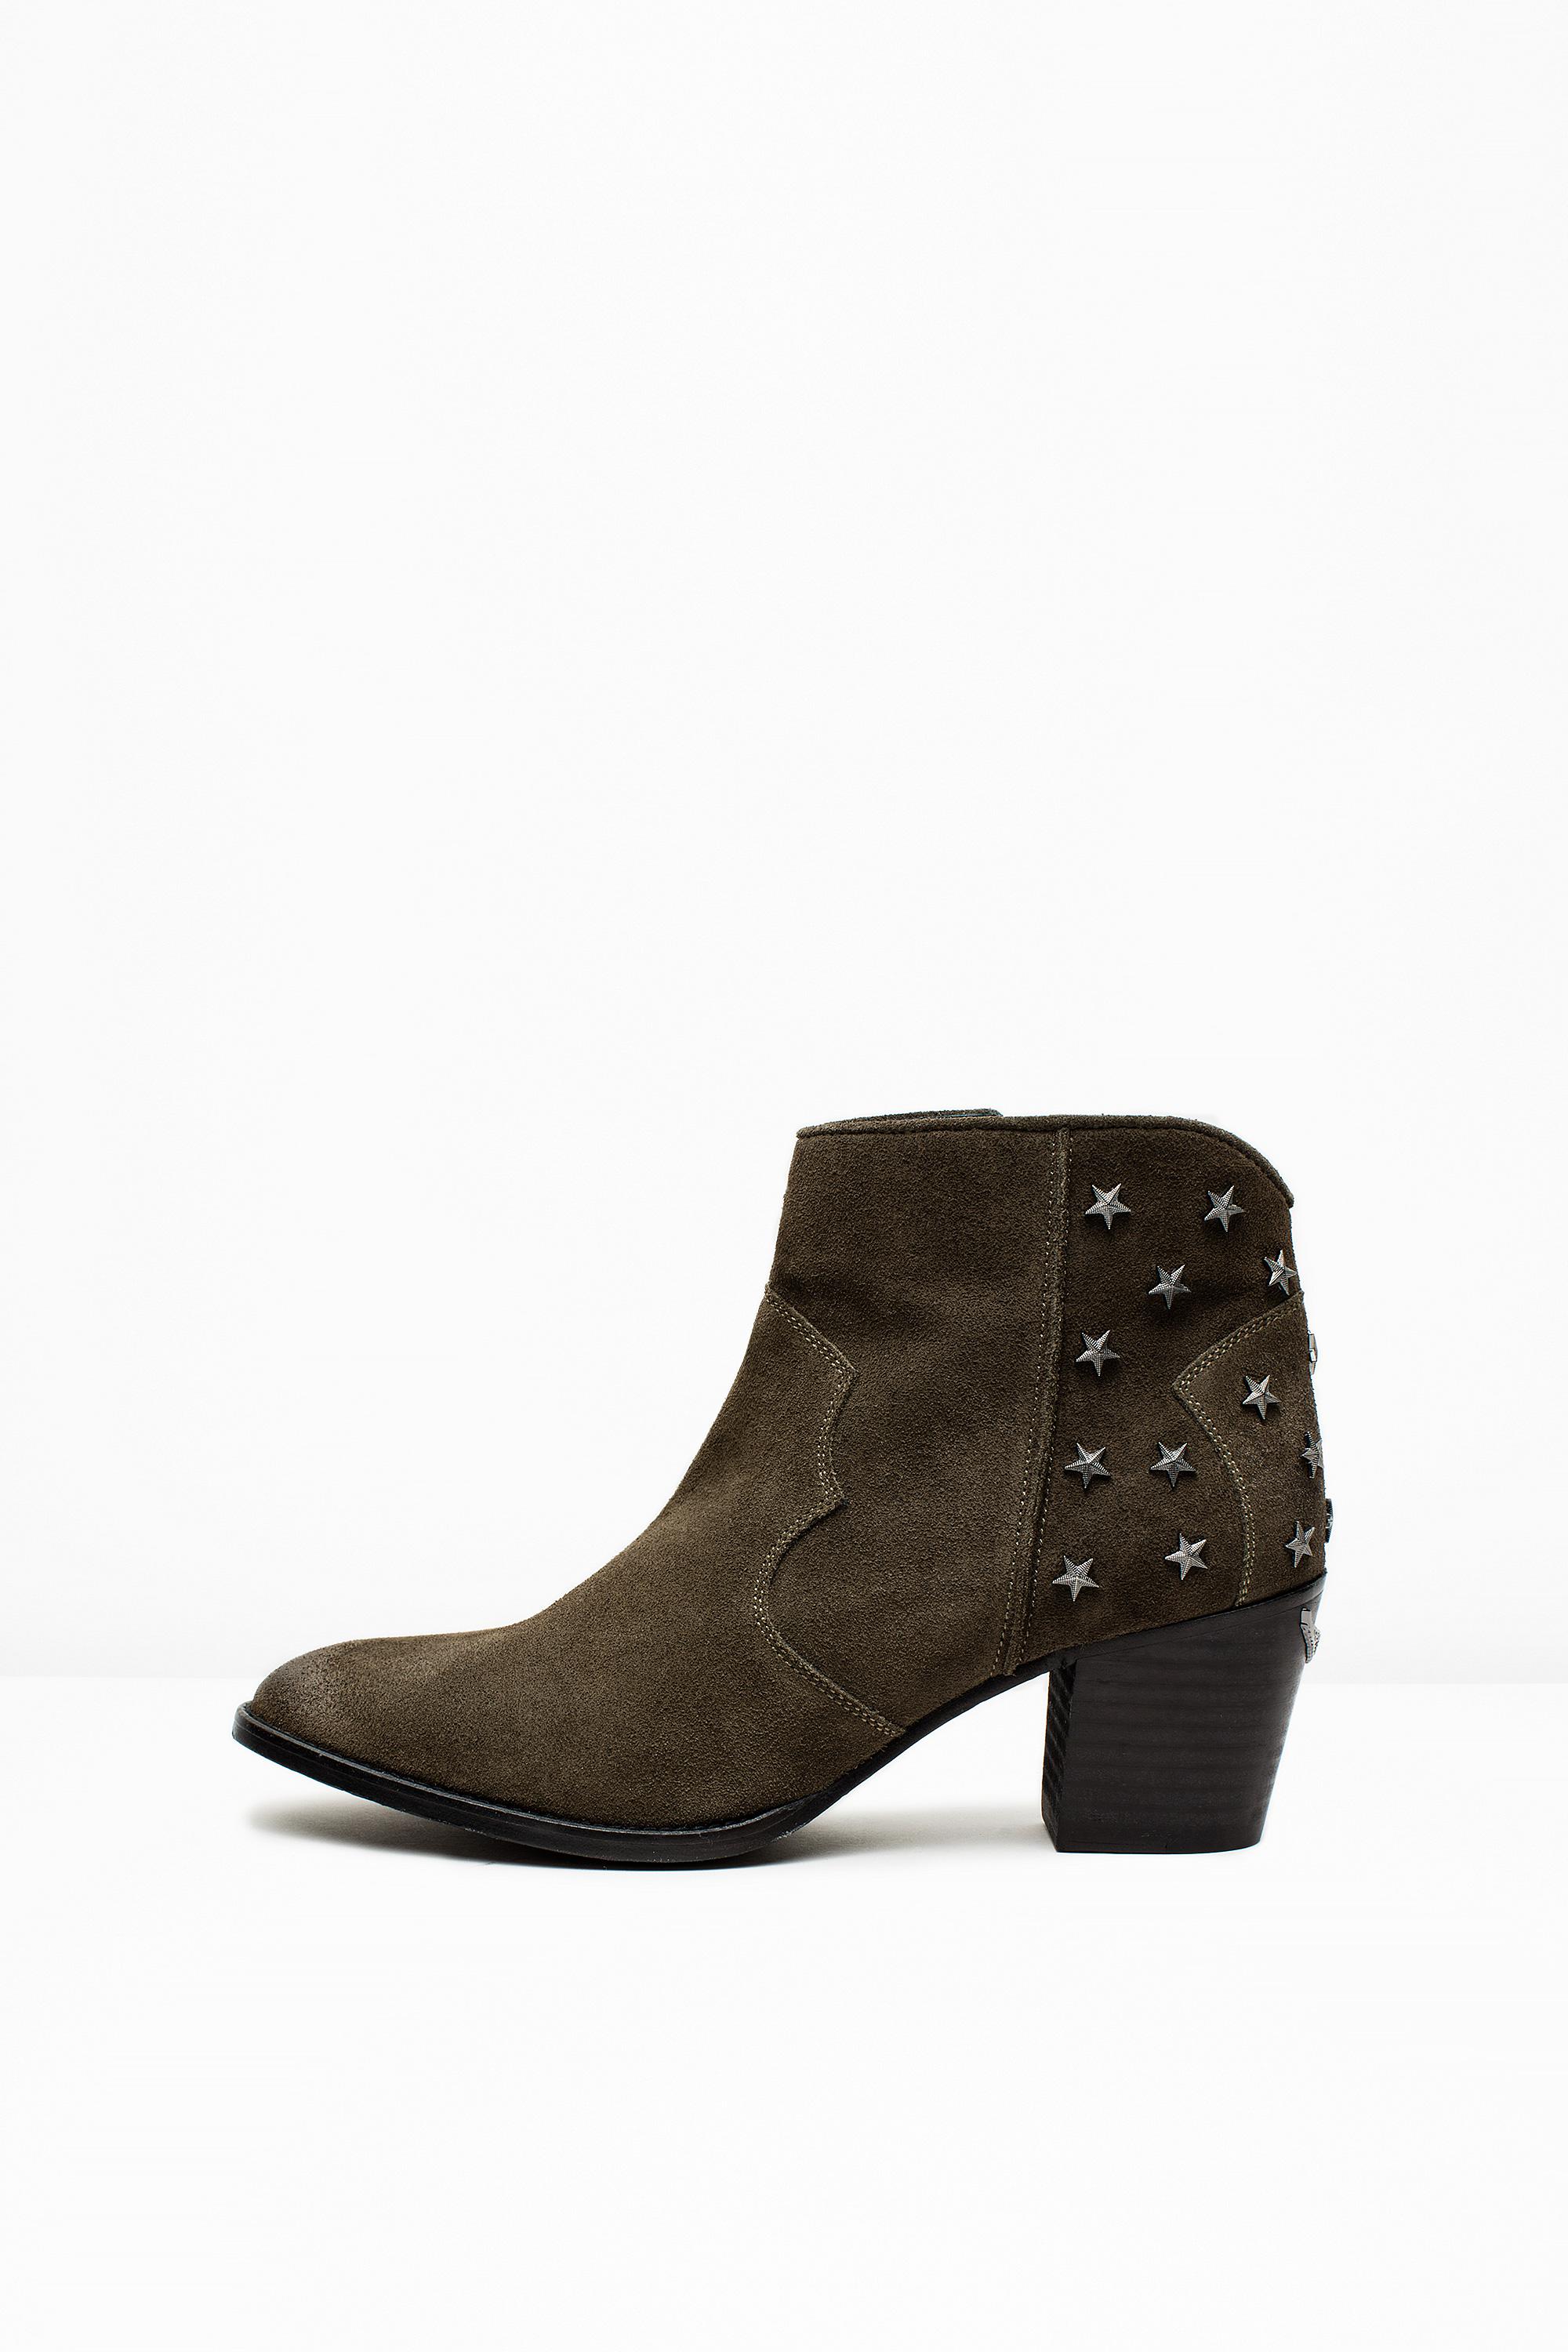 Zadig \u0026 Voltaire Leather Molly Ao Stars 